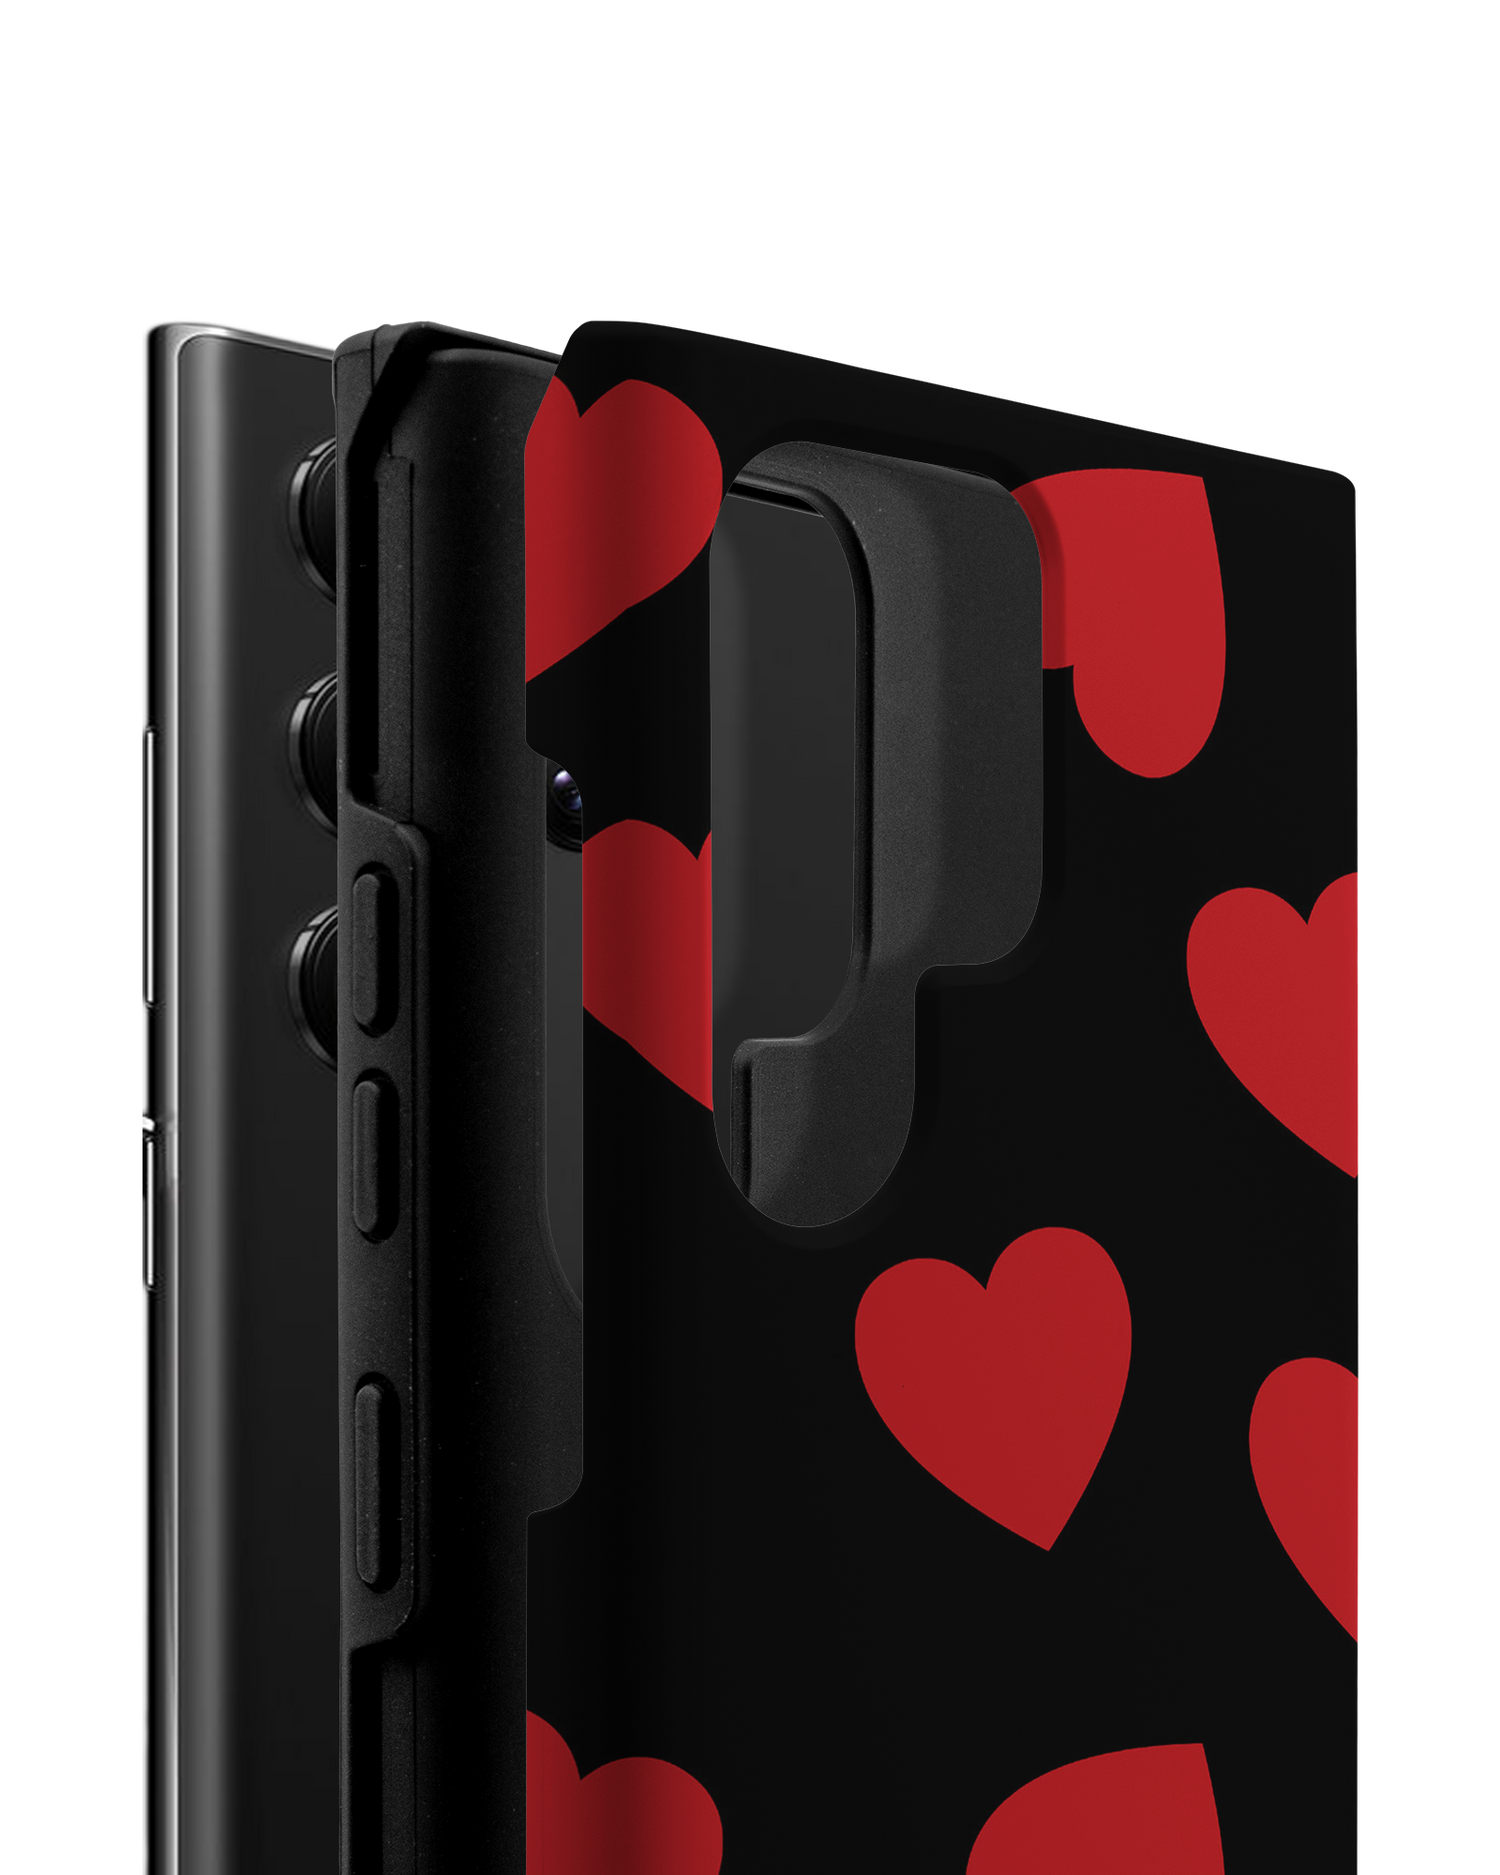 Repeating Hearts Premium Phone Case Samsung Galaxy S22 Ultra 5G consisting of 2 parts